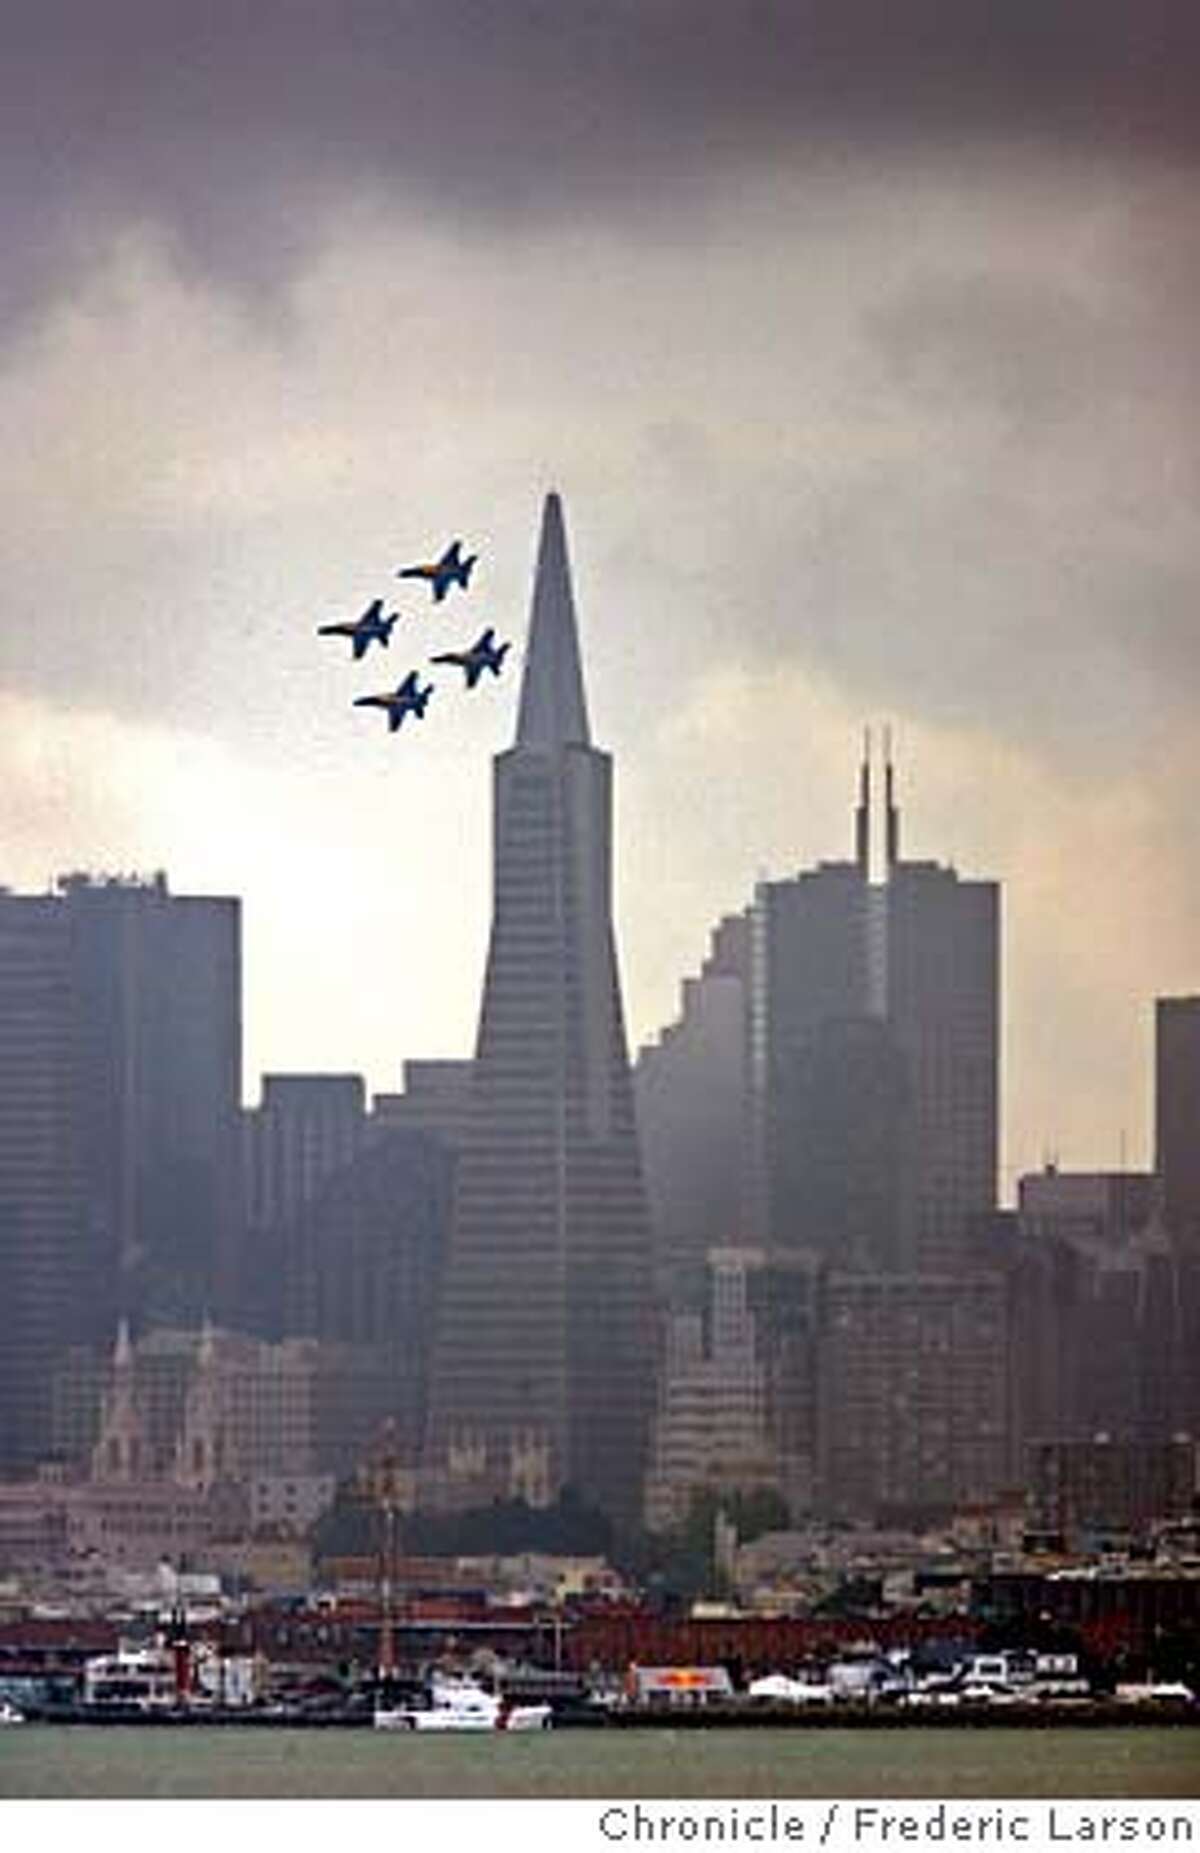 The Blue Angels fly over San Francisco, Thursday, Oct. 5, 2006, in preparation for fleet week and the 60th Anniversary of the US Navy Blue Angels. (AP Photo/San Francisco Chronicle, Fred Larson) ** NO SALES MAGS OUT MANDATORY CREDIT ** Ran on: 10-06-2006 The Blue Angels fly over San Francisco in preparation for Fleet Week and for the 60th anniversary of the U.S. Navys flight team. Ran on: 10-06-2006 The Blue Angels fly over San Francisco in preparation for Fleet Week and for the 60th anniversary of the U.S. Navys flight team. Ran on: 10-06-2006 The Blue Angels fly over San Francisco in preparation for Fleet Week and for the 60th anniversary of the U.S. Navys flight team. Ran on: 10-06-2006 The Blue Angels fly over San Francisco in preparation for Fleet Week and for the 60th anniversary of the U.S. Navys flight team. NO SALES MAGS OUT MANDATORY CREDIT